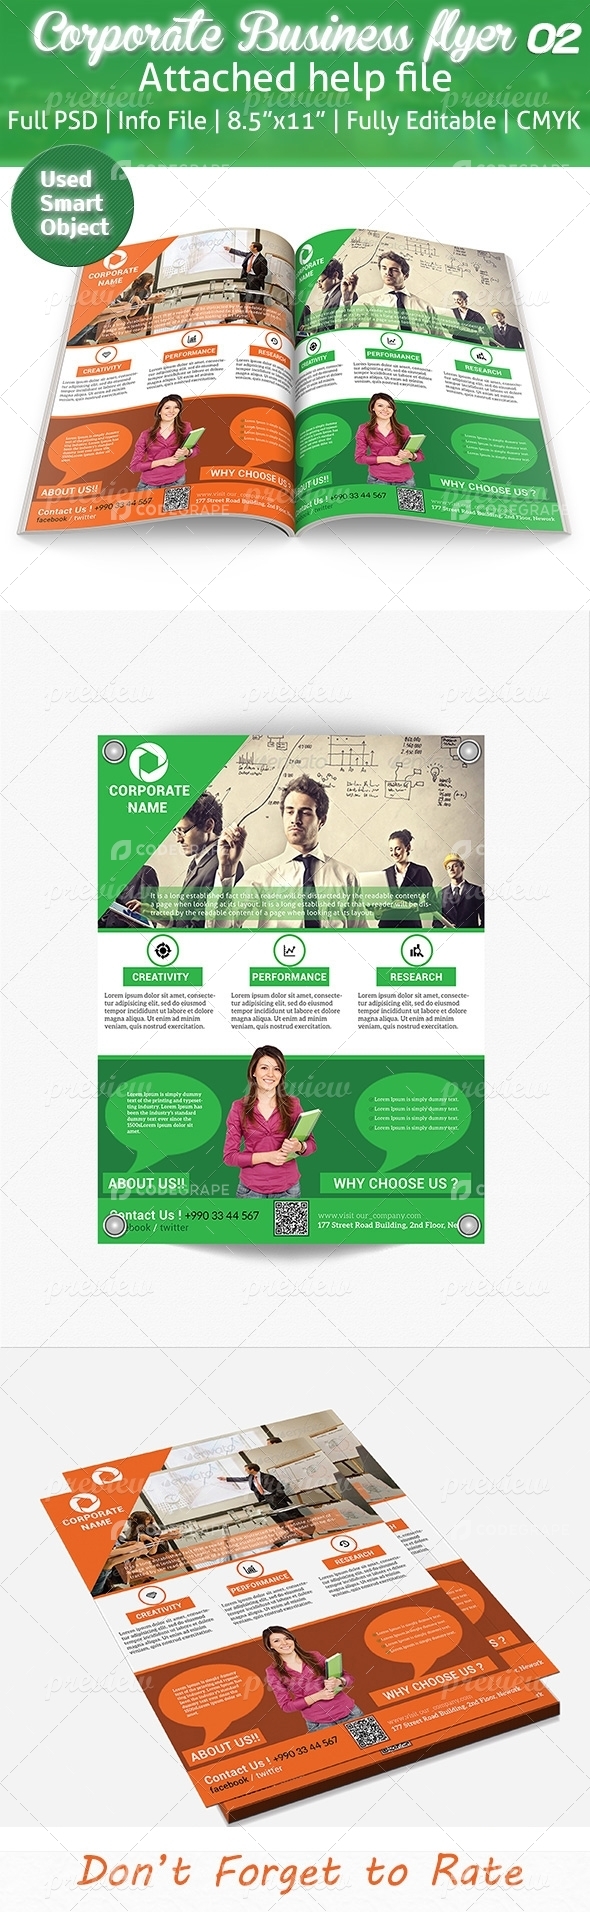 Corporate Business Flyer 02